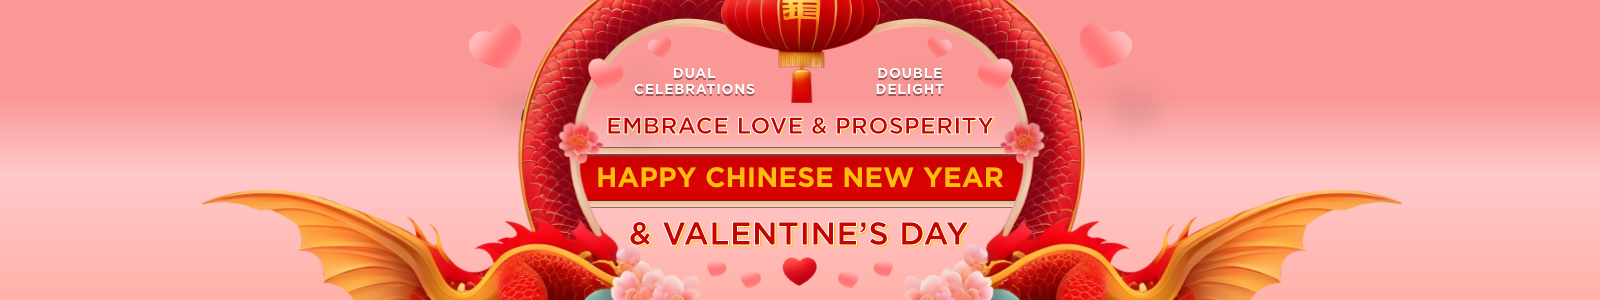 Dual Celebrations, Double Delight: Embrace Love and Prosperity this Chinese New Year & Valentine's Day Act Fast & Shop Now